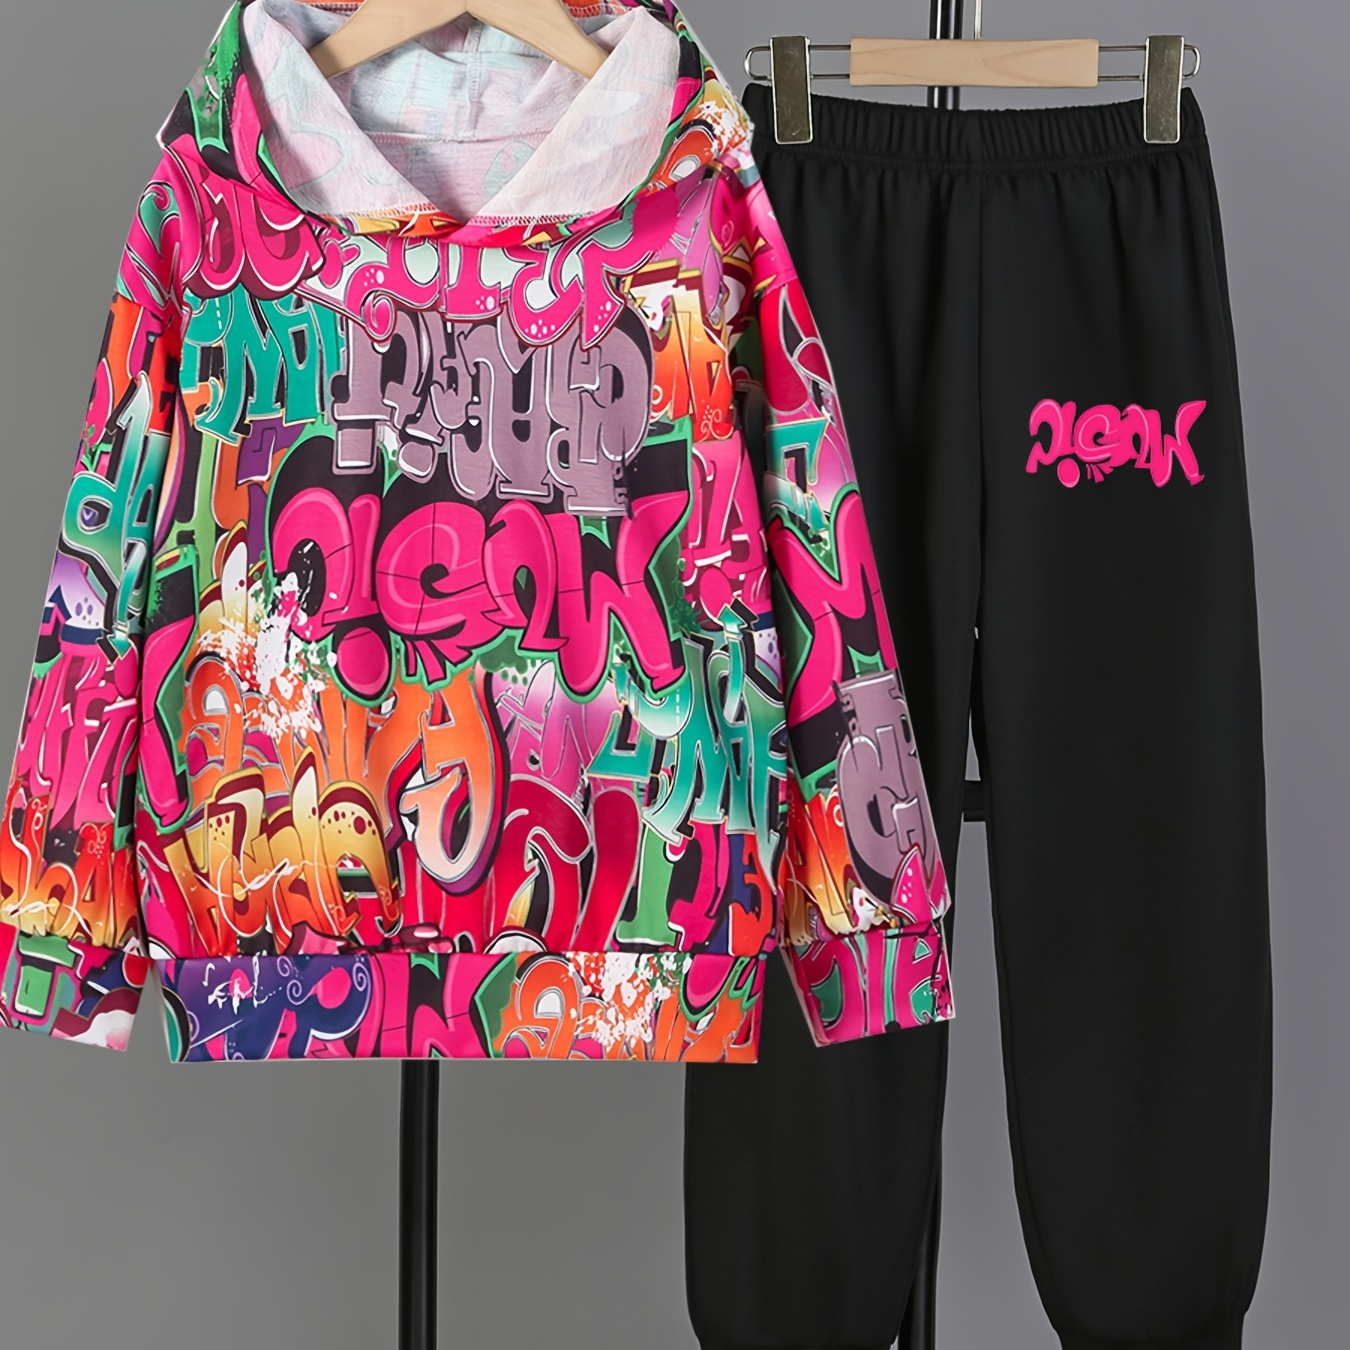 

Fashionable 2 Packs Girls' Sets, Graffiti Print Hoodies & Jogger Pants, Kids Clothes For Fall Sports Everyday